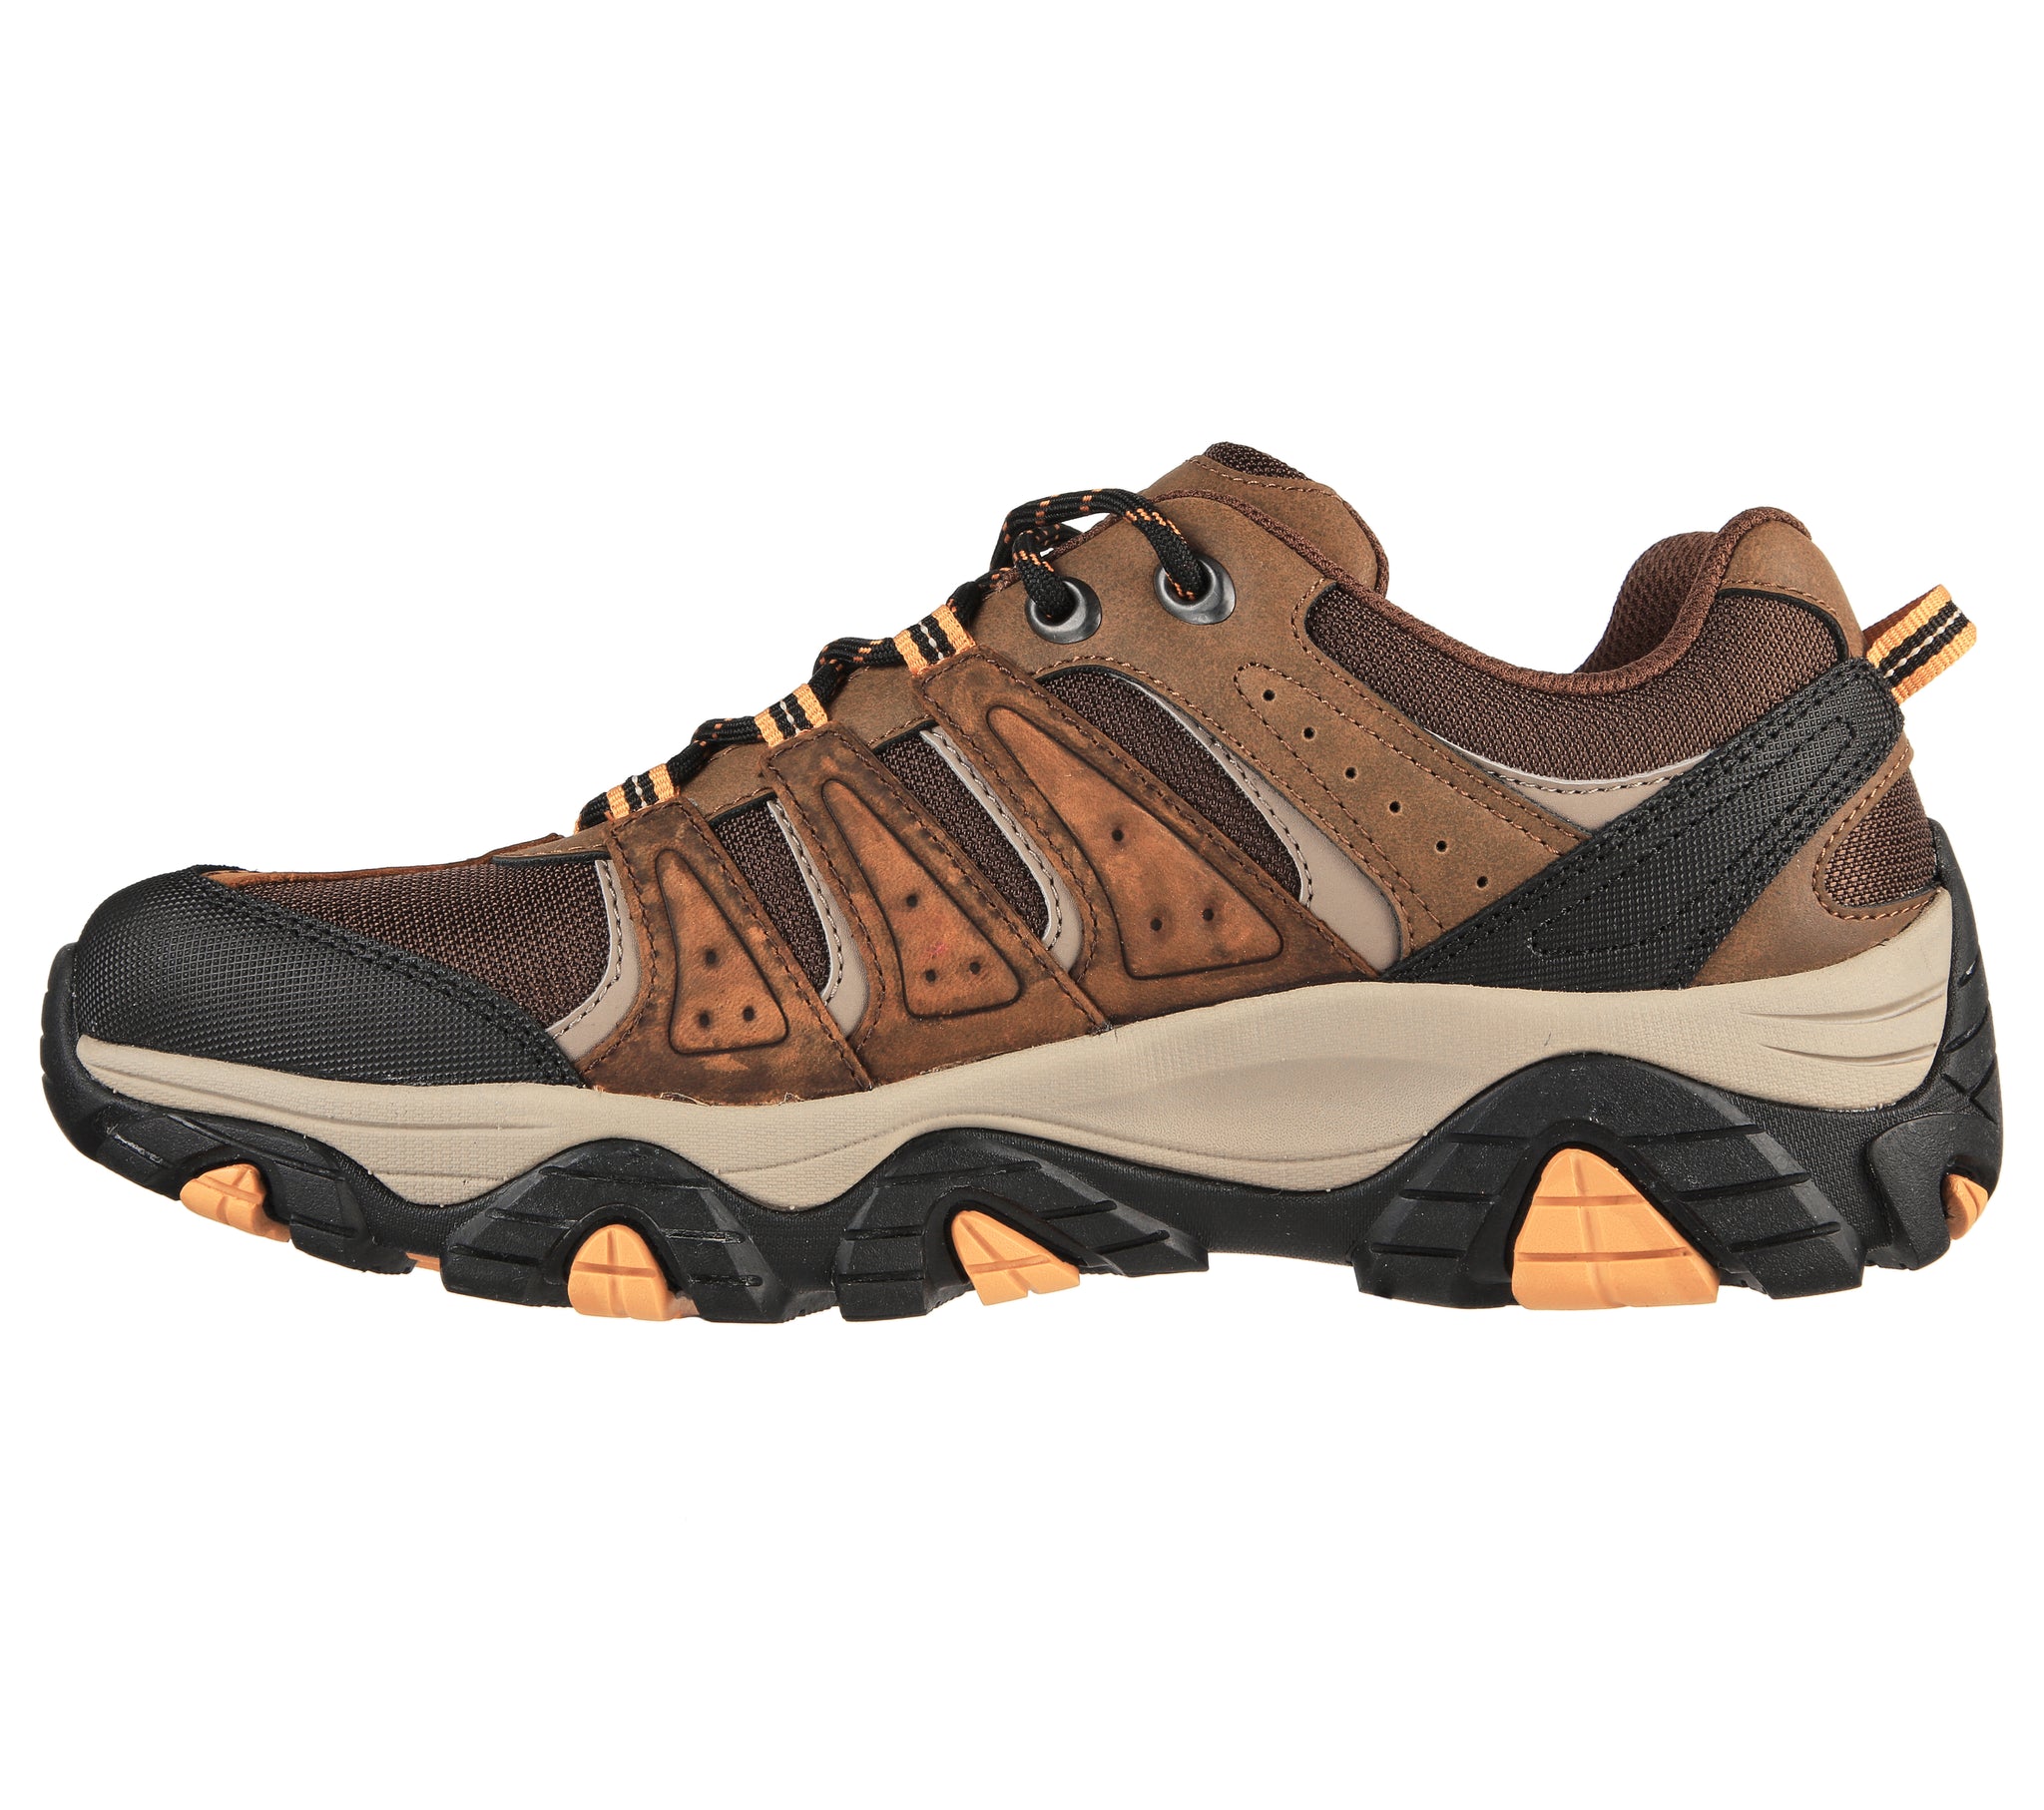 204242 CHAR - RELAXED FIT: PINE TRAIL - KORDOVA - Shoess